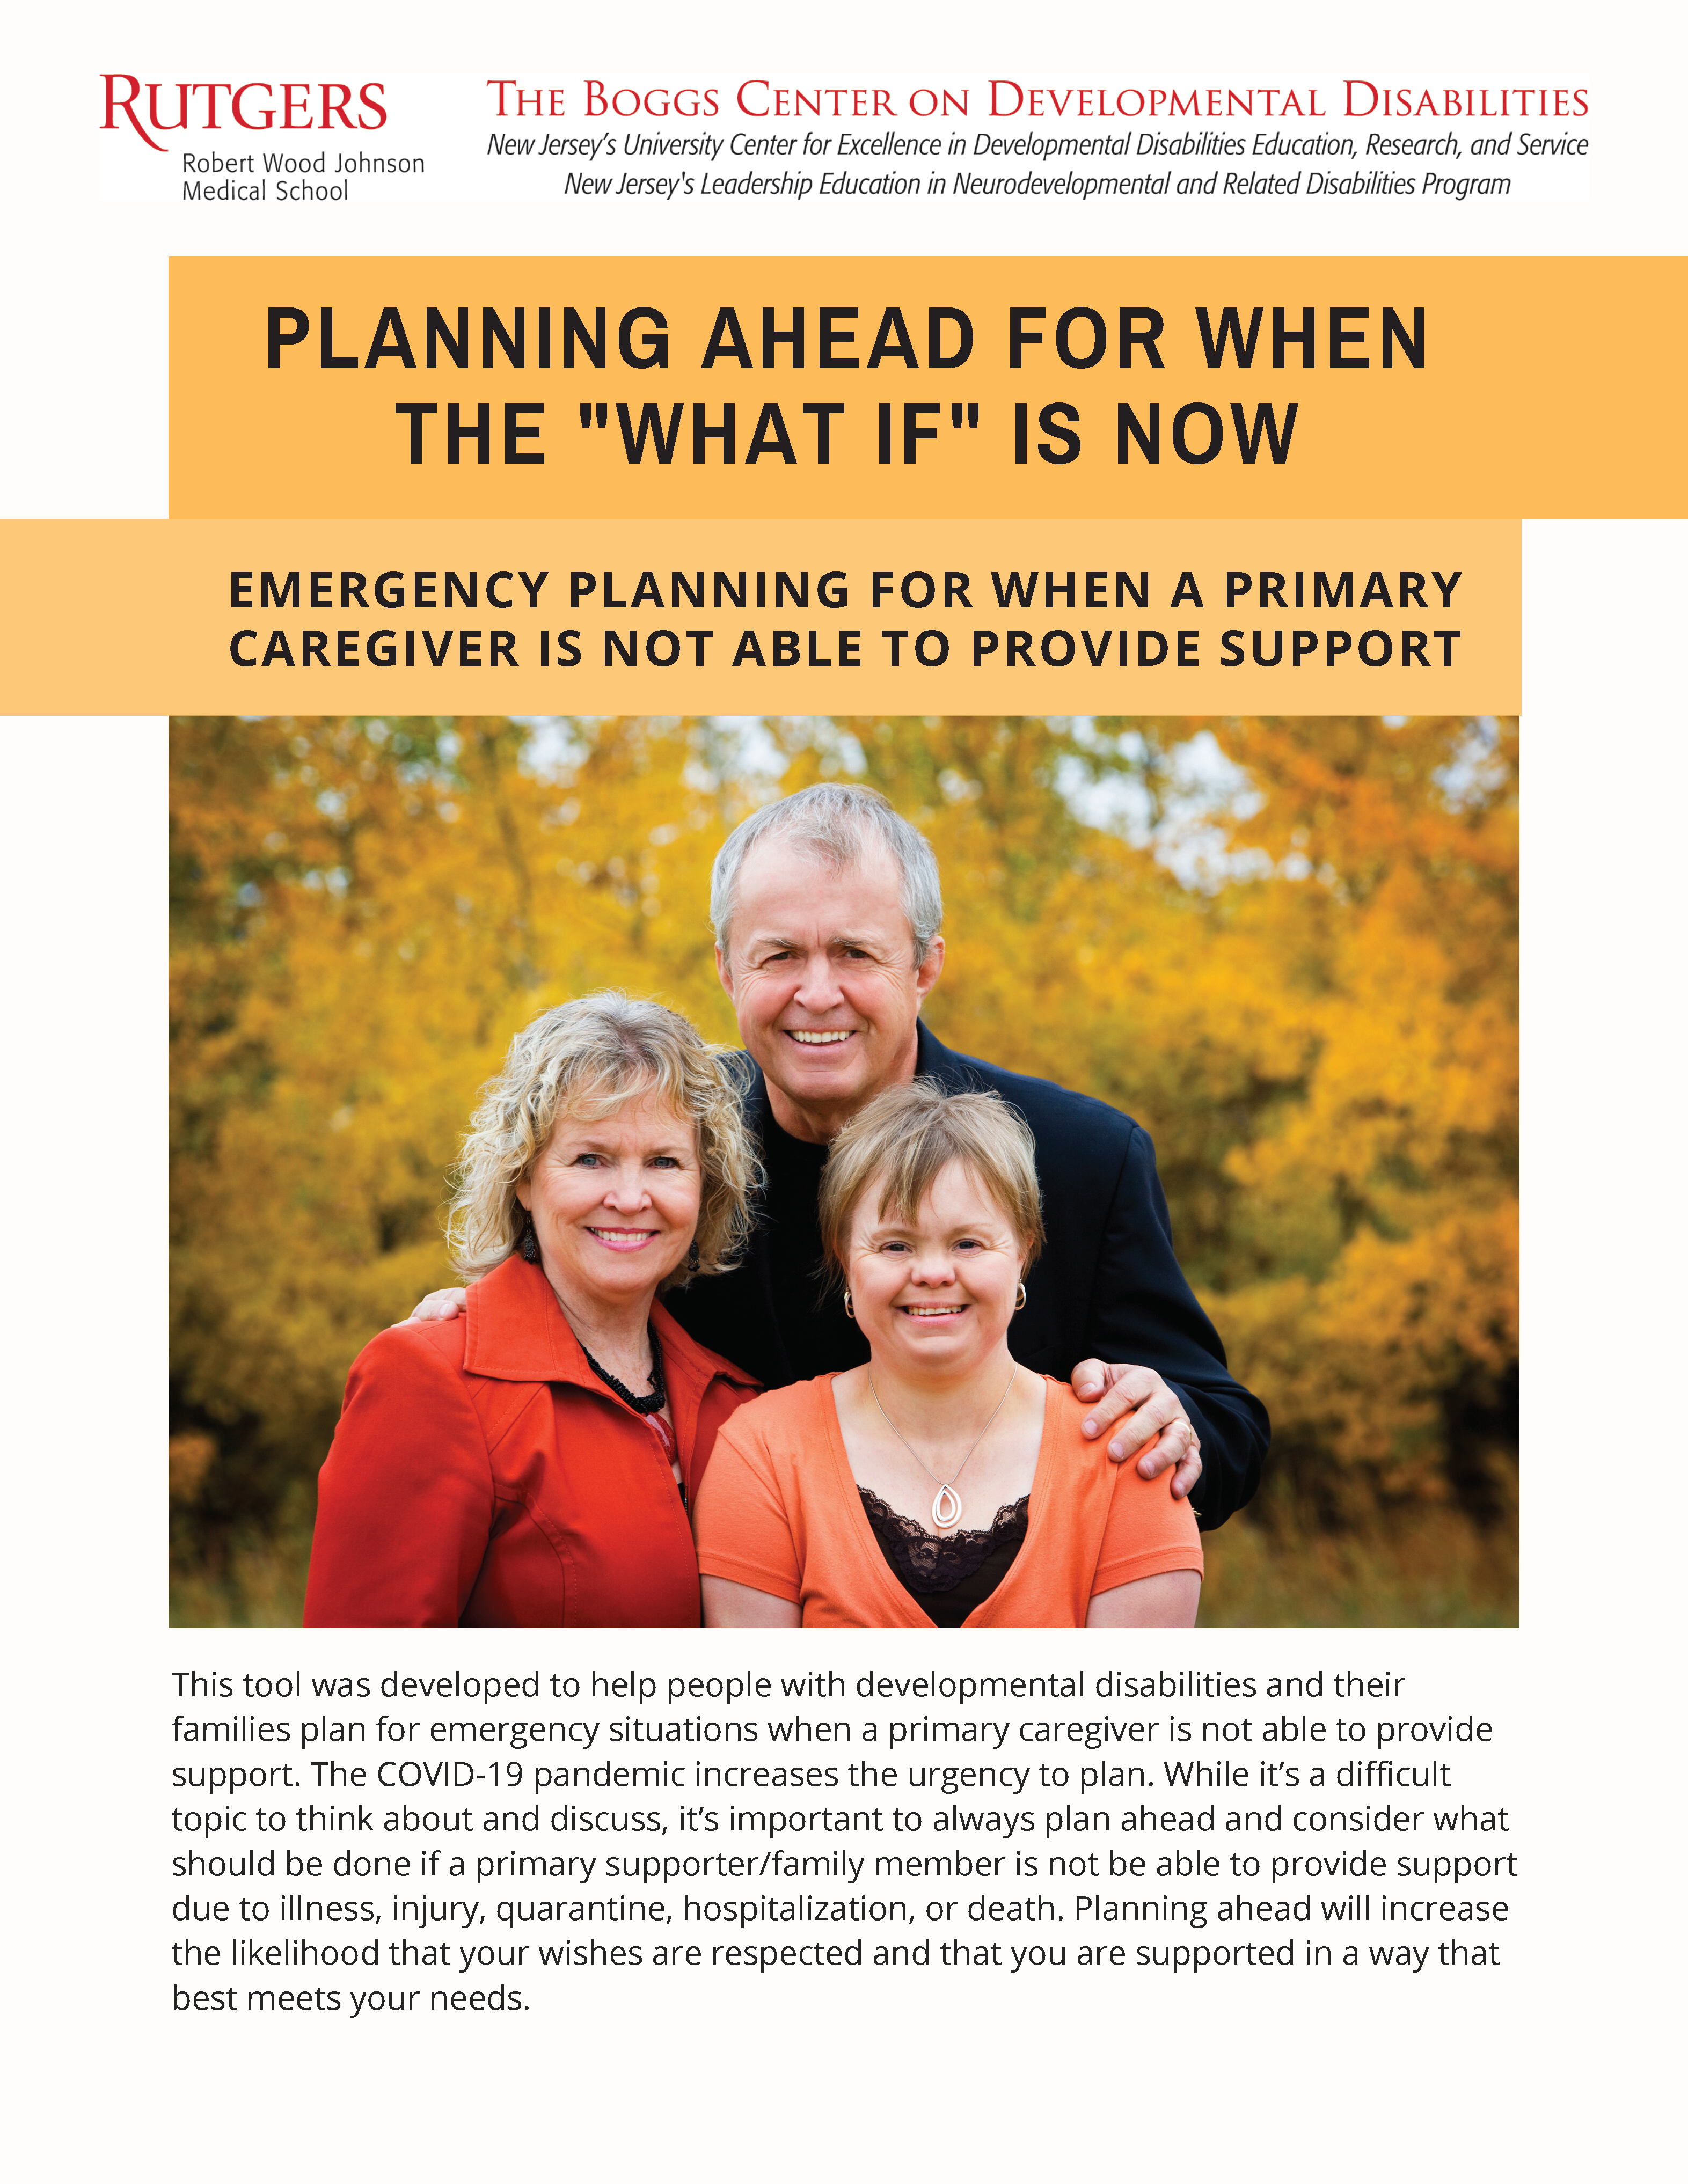 Planning Ahead Publication Cover